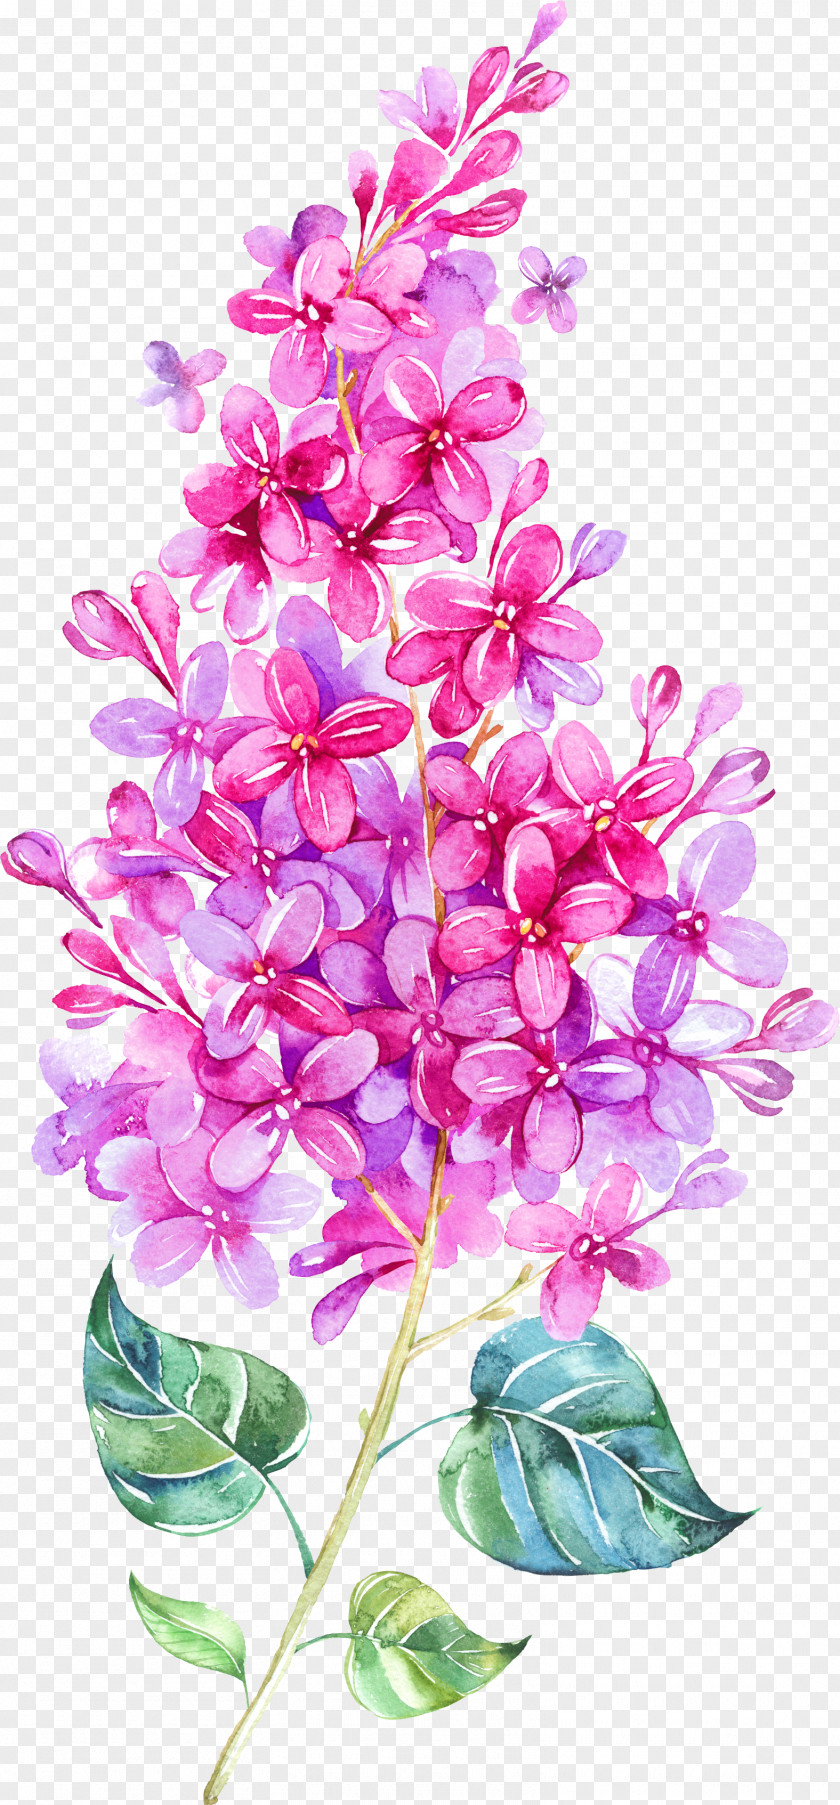 Floating Flower IPhone 6 Watercolor Painting Lilac Clip Art PNG